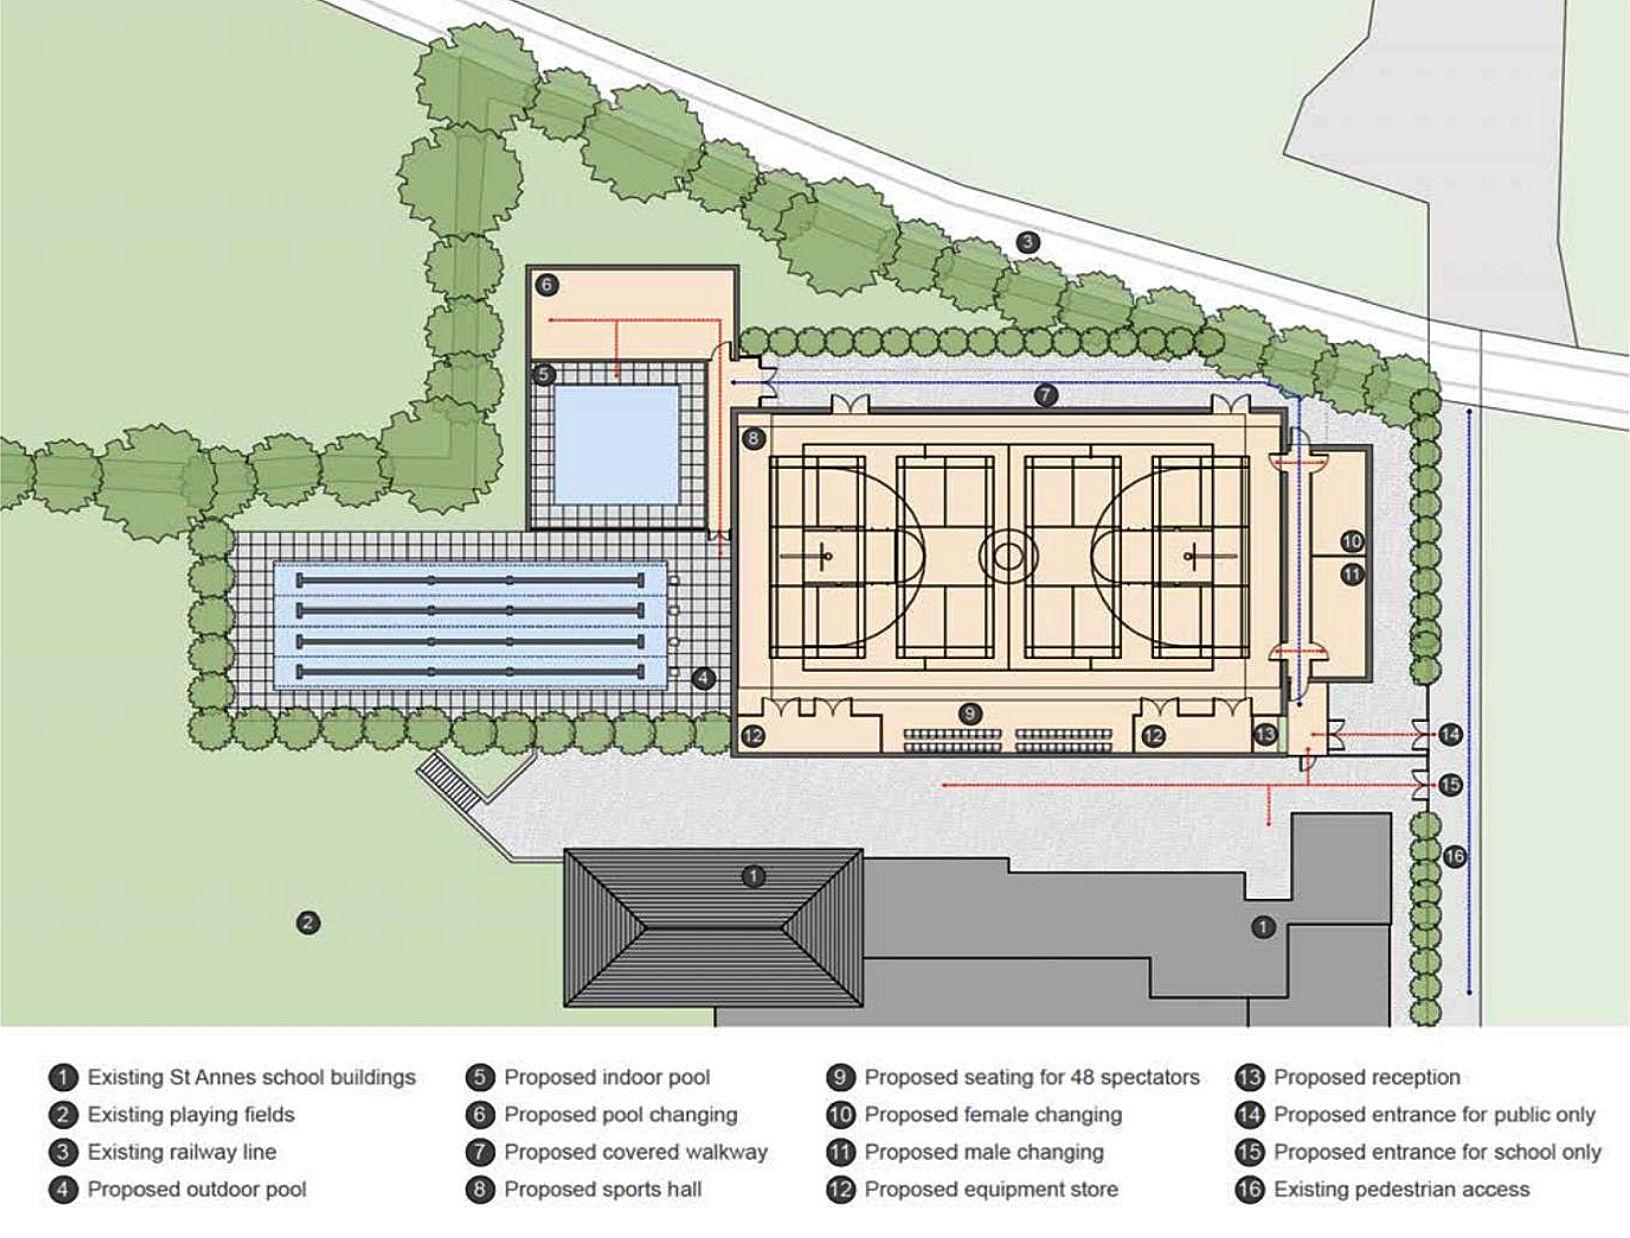 Alderney swimming pools and sports hall plan